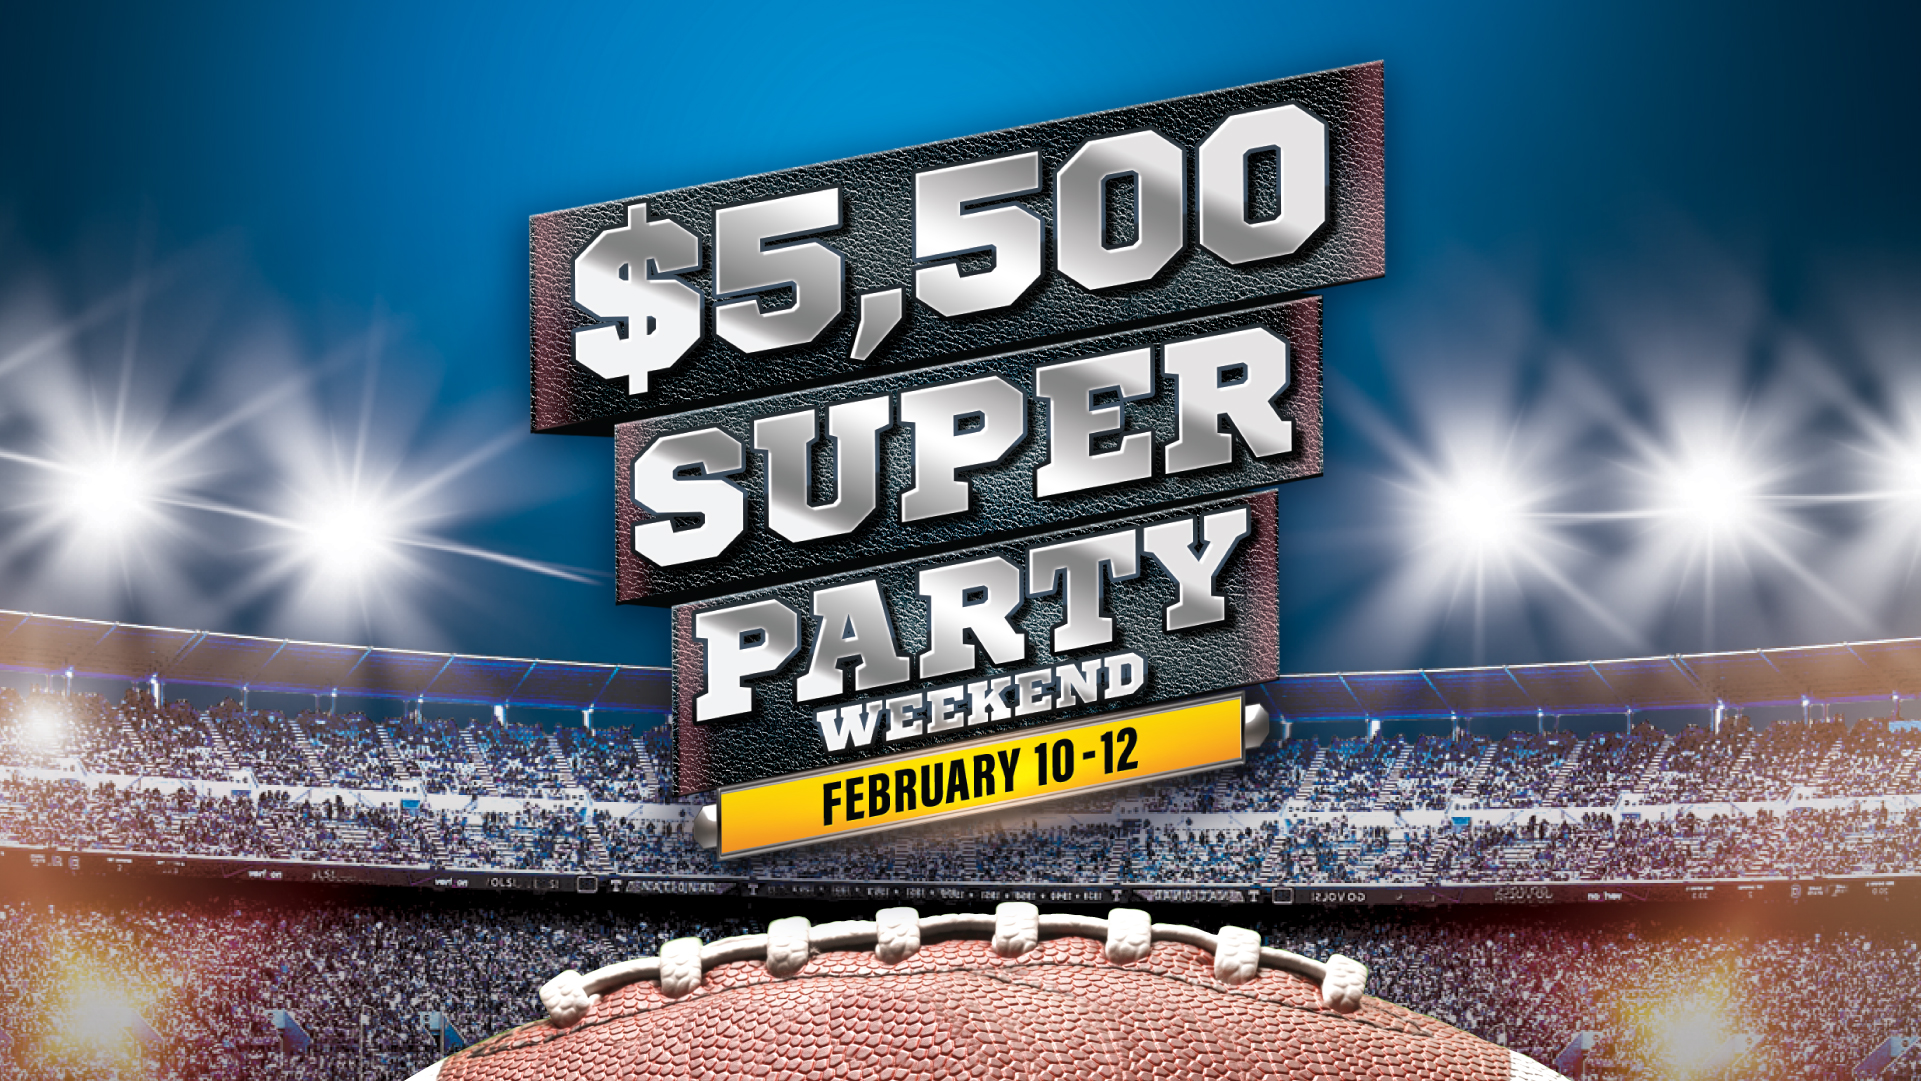 $5,500 Super Party Weekend February 10-12 Get in on the action! This weekend has nonstop play! Watch Football, Drink Beer, Earn Gear For 50 Credits Sunday Touchdown Hot Seats - Two Winners Receive $100 In Free Play Defend the Slot Tournament 100 Tier Credits For Entry 1st Place $350 Free Play 2nd Place $200 Free Play 3rd Place $150 Free Play 4th Place $100 Free Play 5th Place $75 Free Play 6th-10th Place $50 Free Play 11th-20th Place $25 Free Play 21st-30th Place $10 Free Play 31st-35th Place $5 Free Play